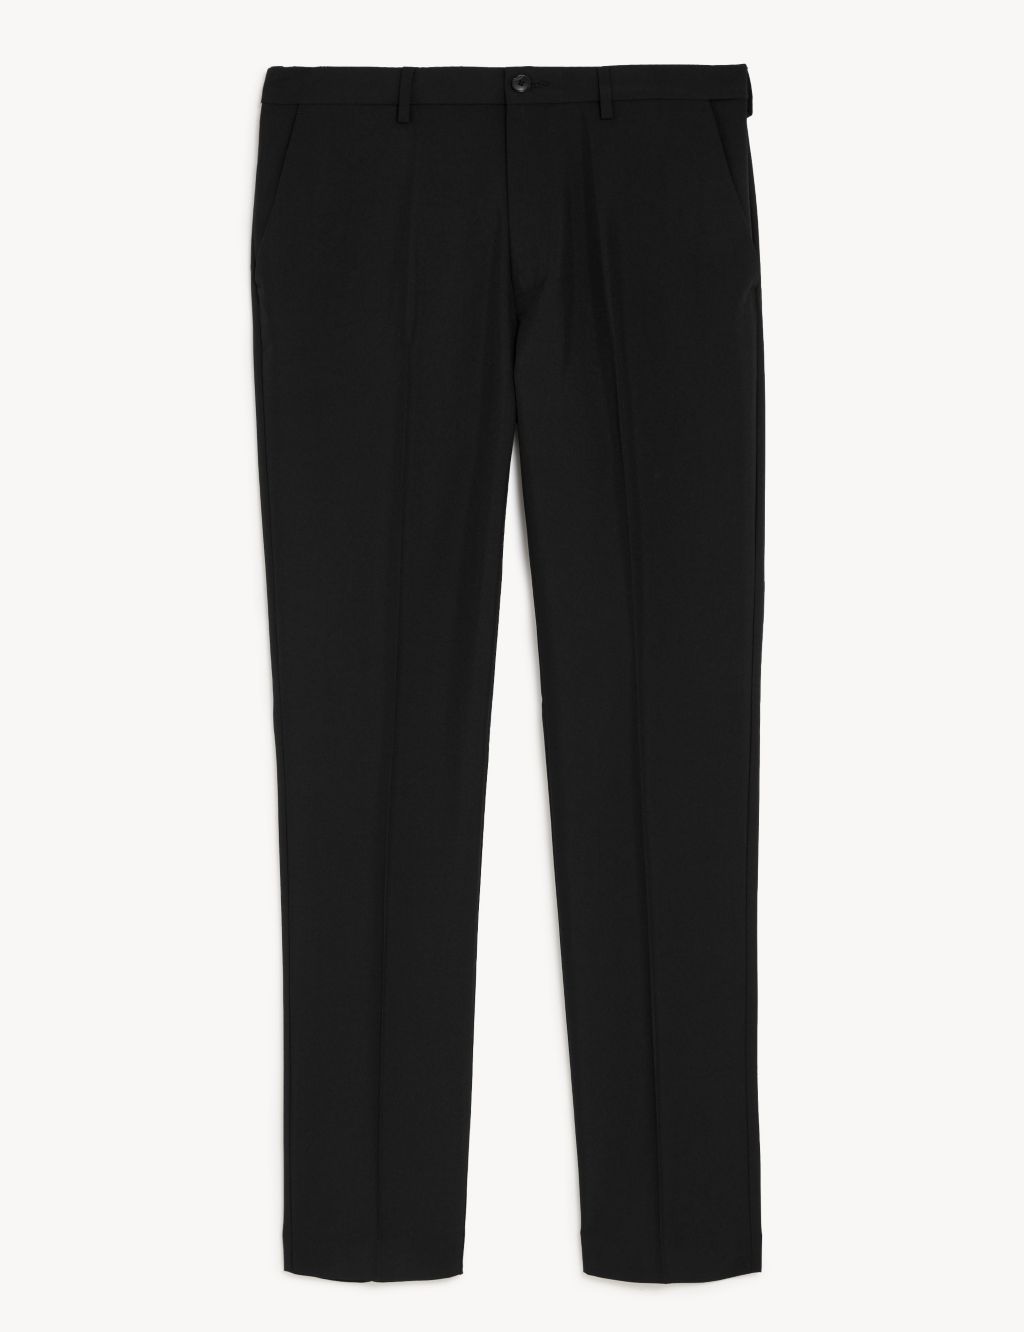 Slim Fit Trouser with Active Waist image 8